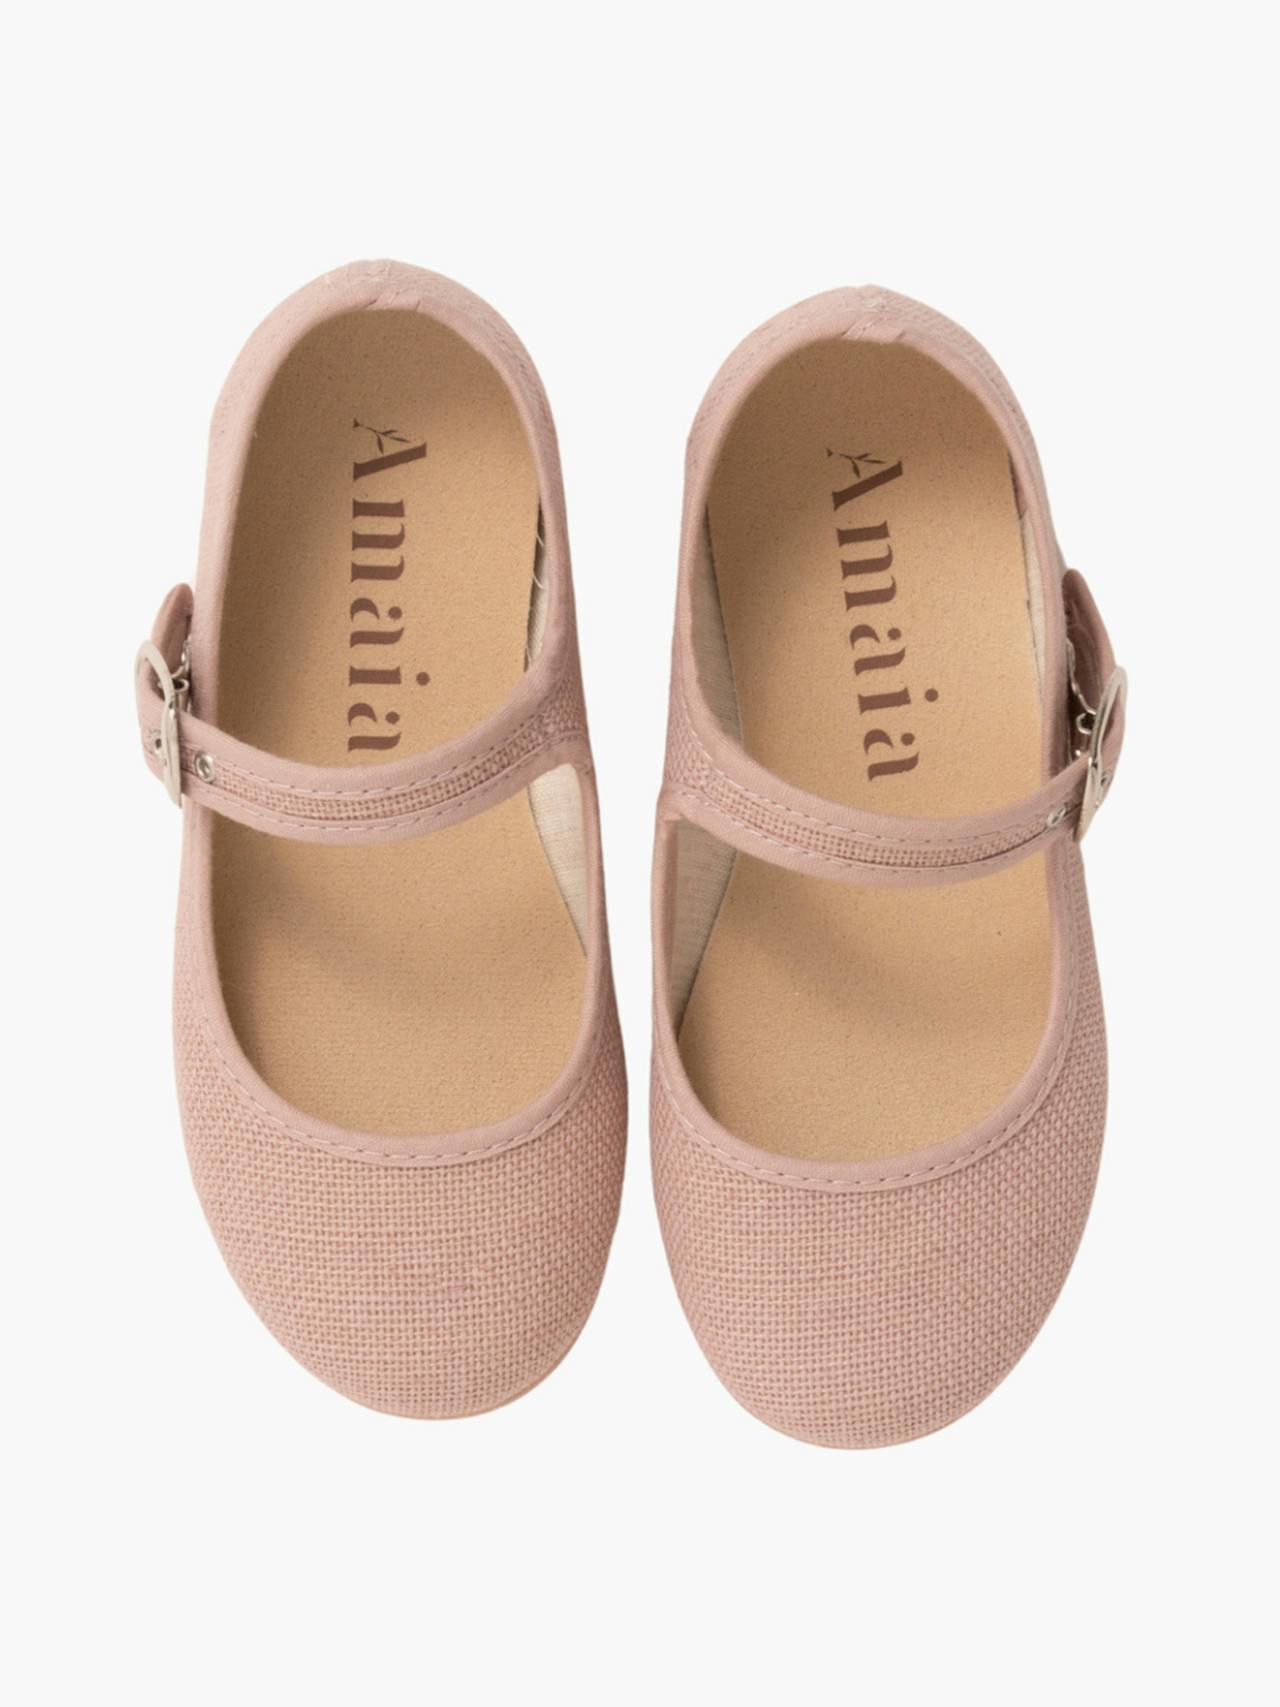 Linen Mary Jane pastel pink